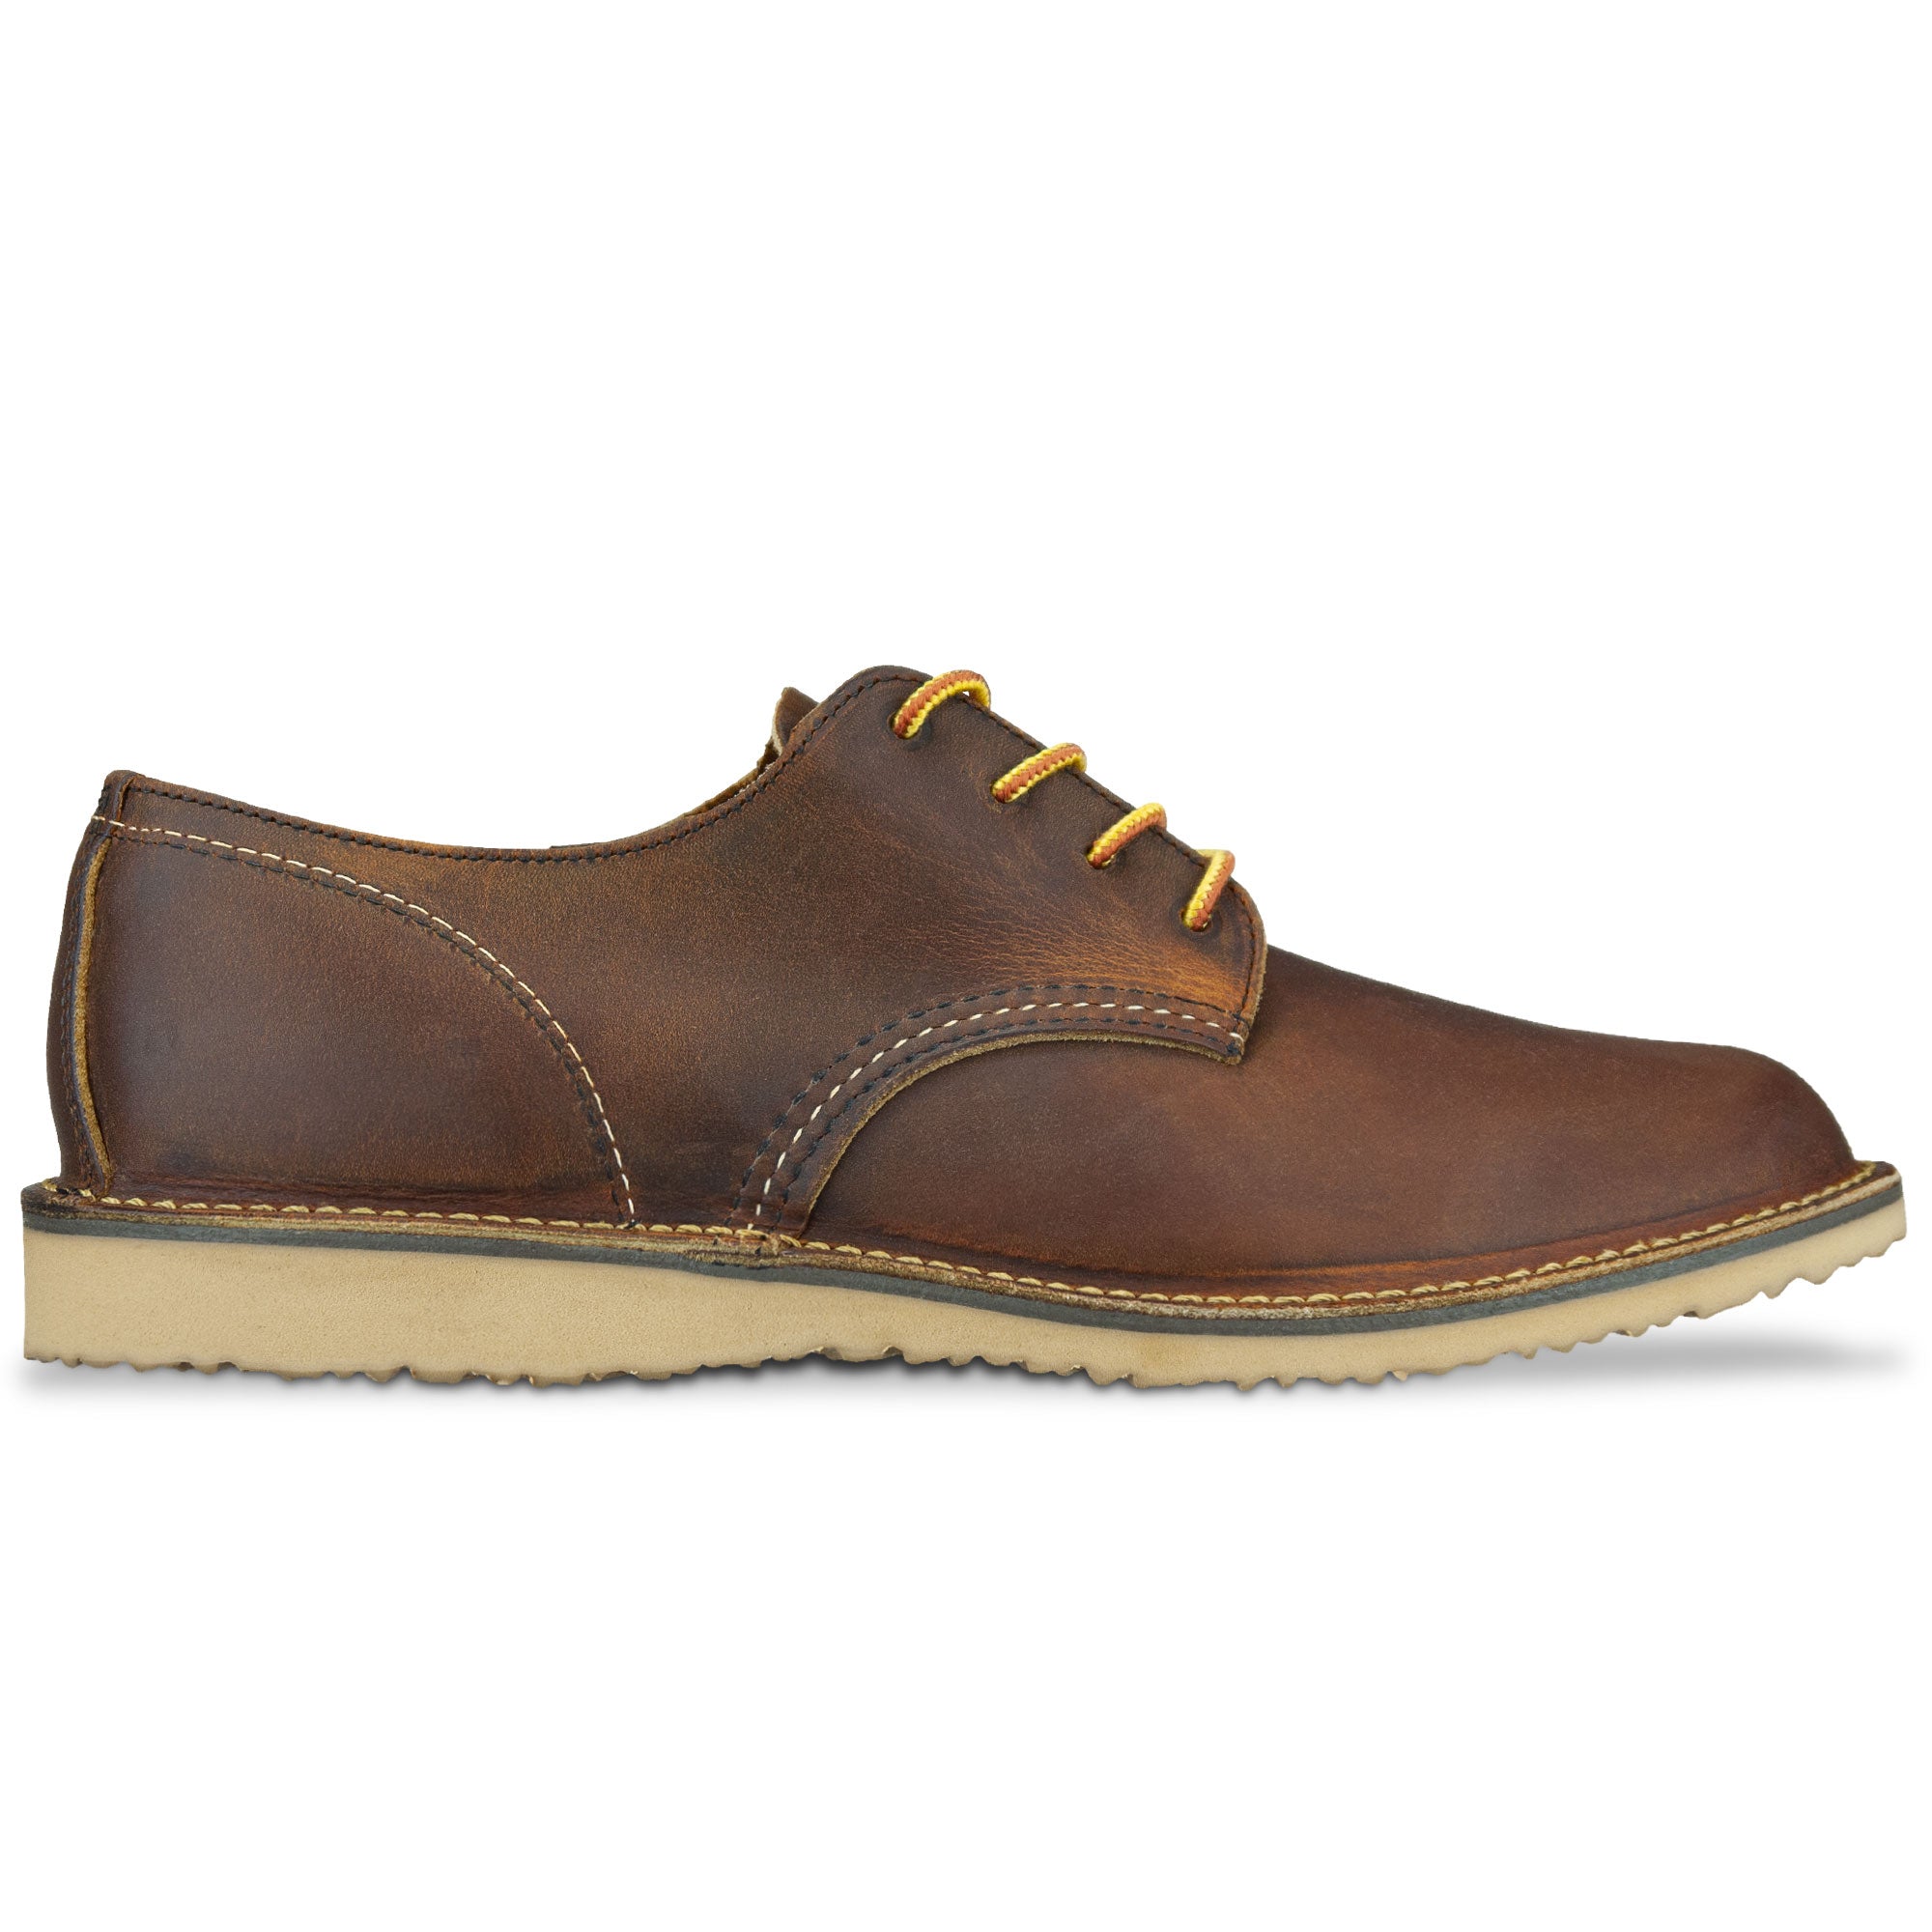 Red Wing 3303 Weekender Oxford Shoe - Copper Rough & Tough